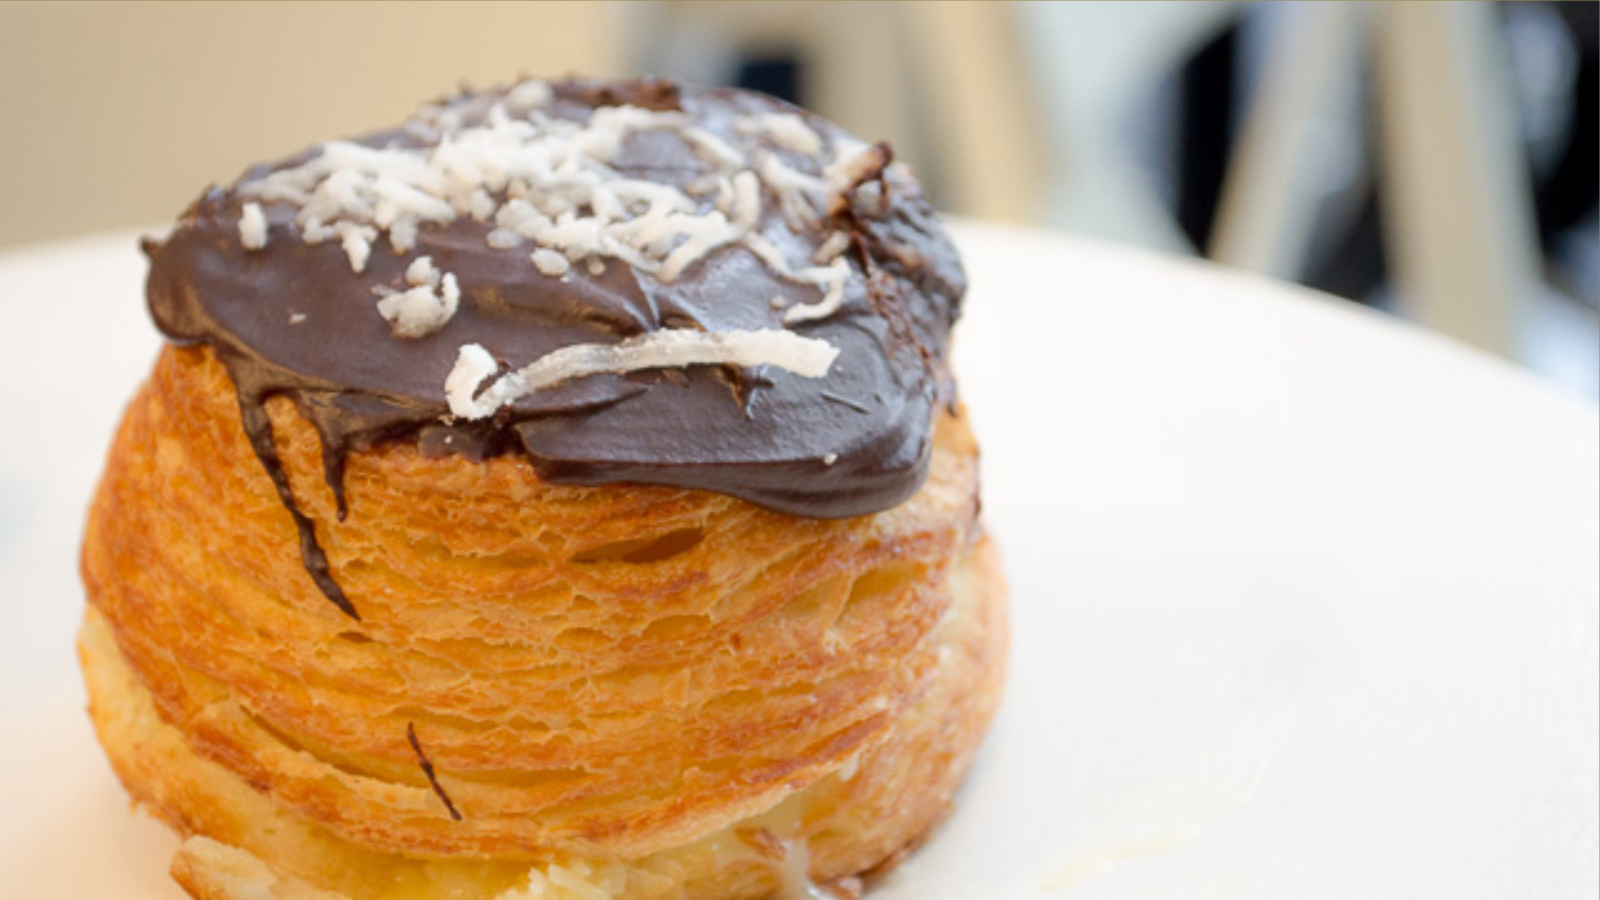 Attention sweeties, we have the cure for your sweet tooth with these Sweet Spots in Montréal